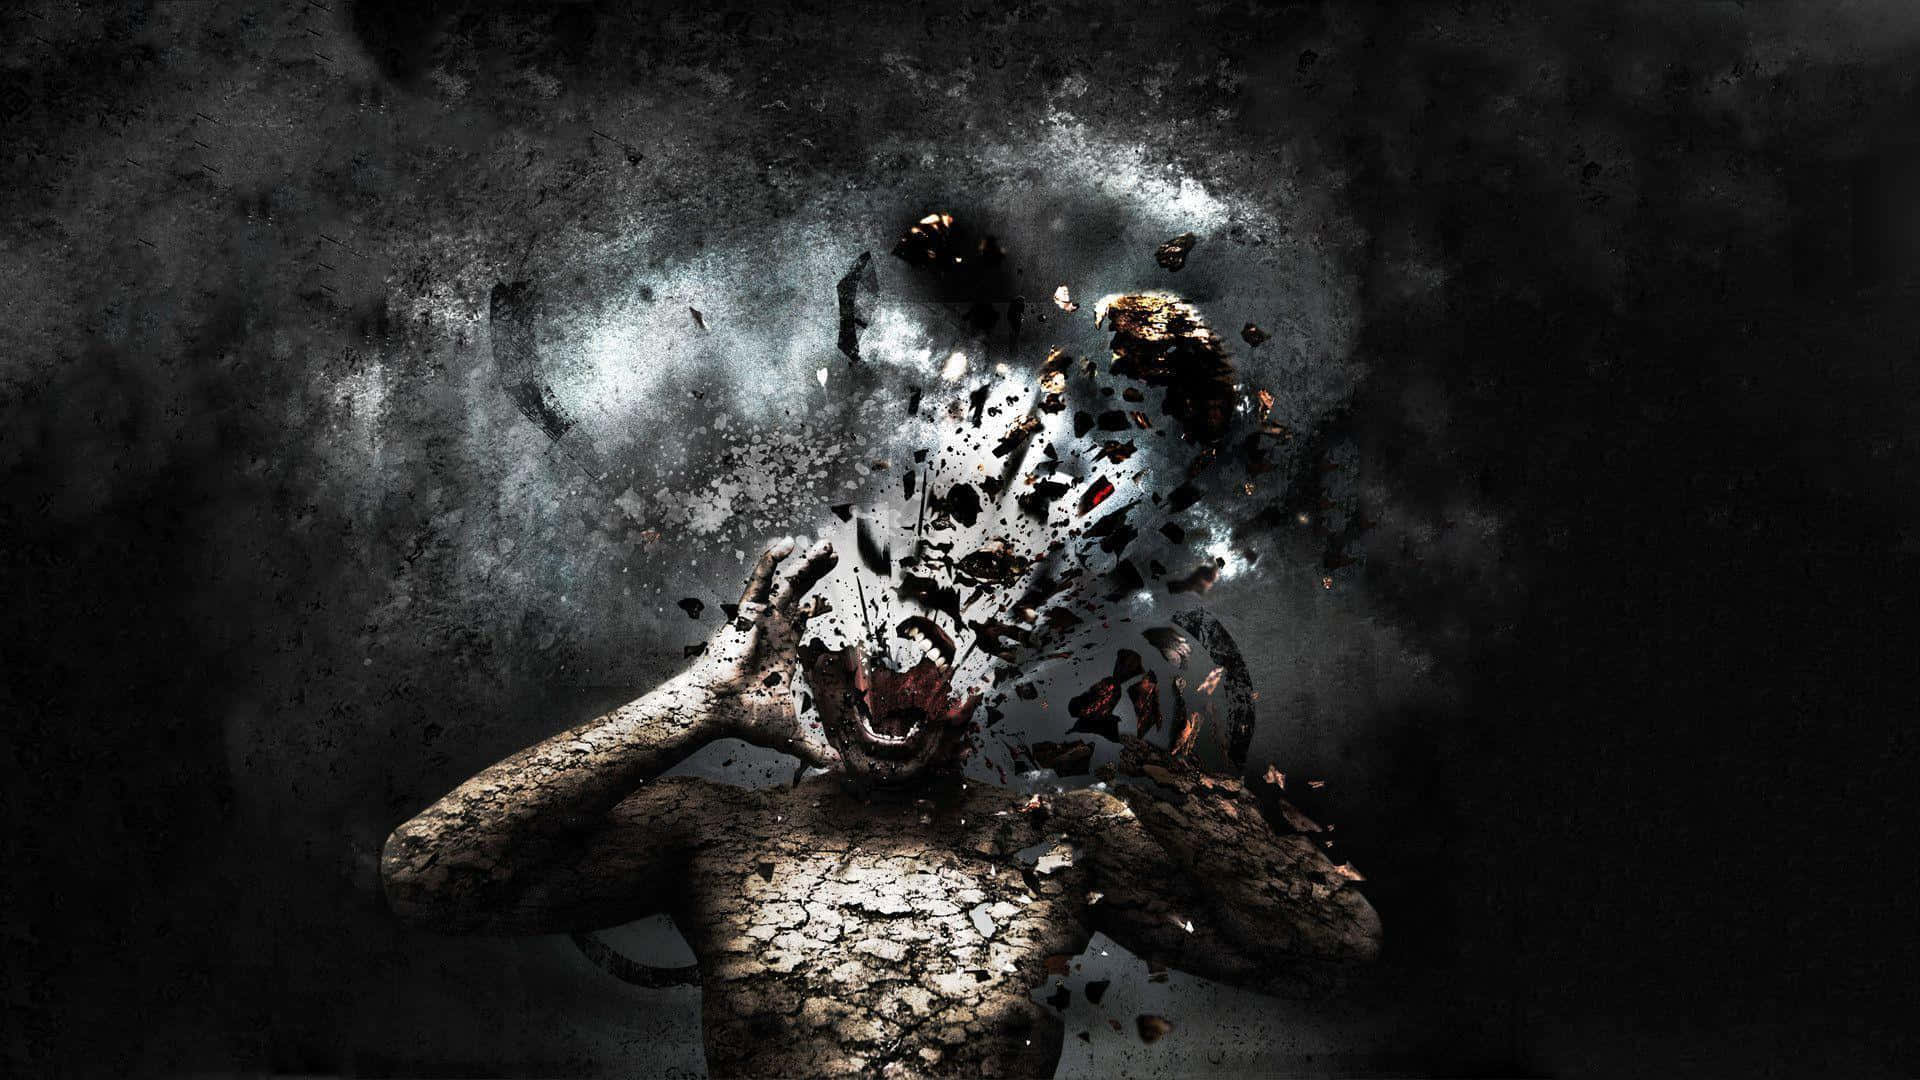 Obscure Exploding Man With Dark Sky Wallpaper